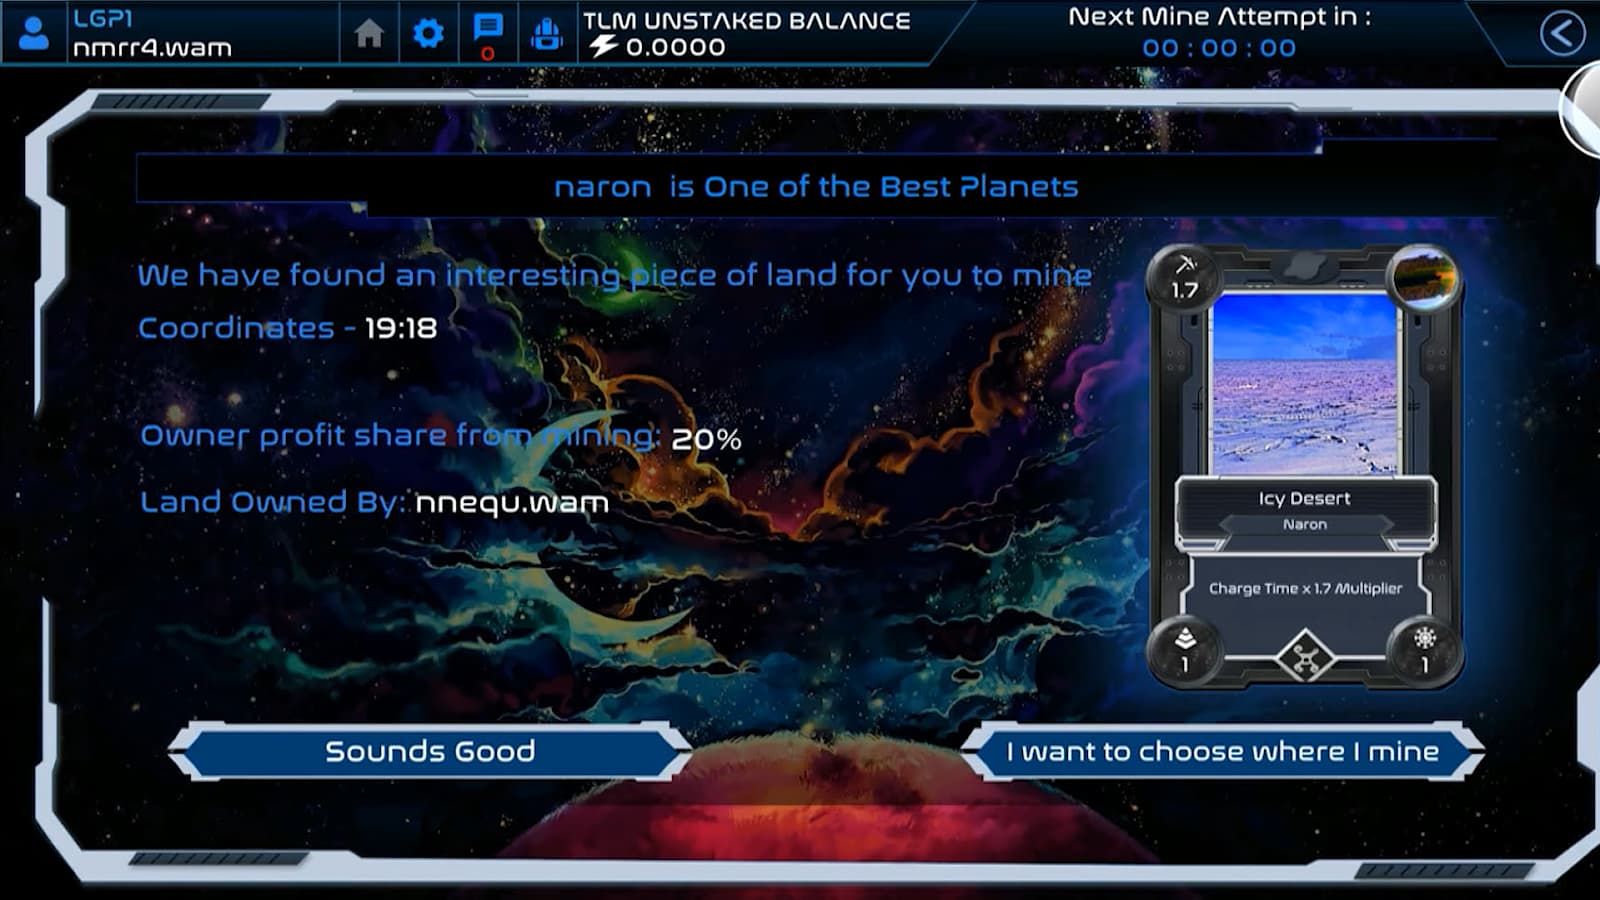 A game interface displaying a space-themed mining game with text and options